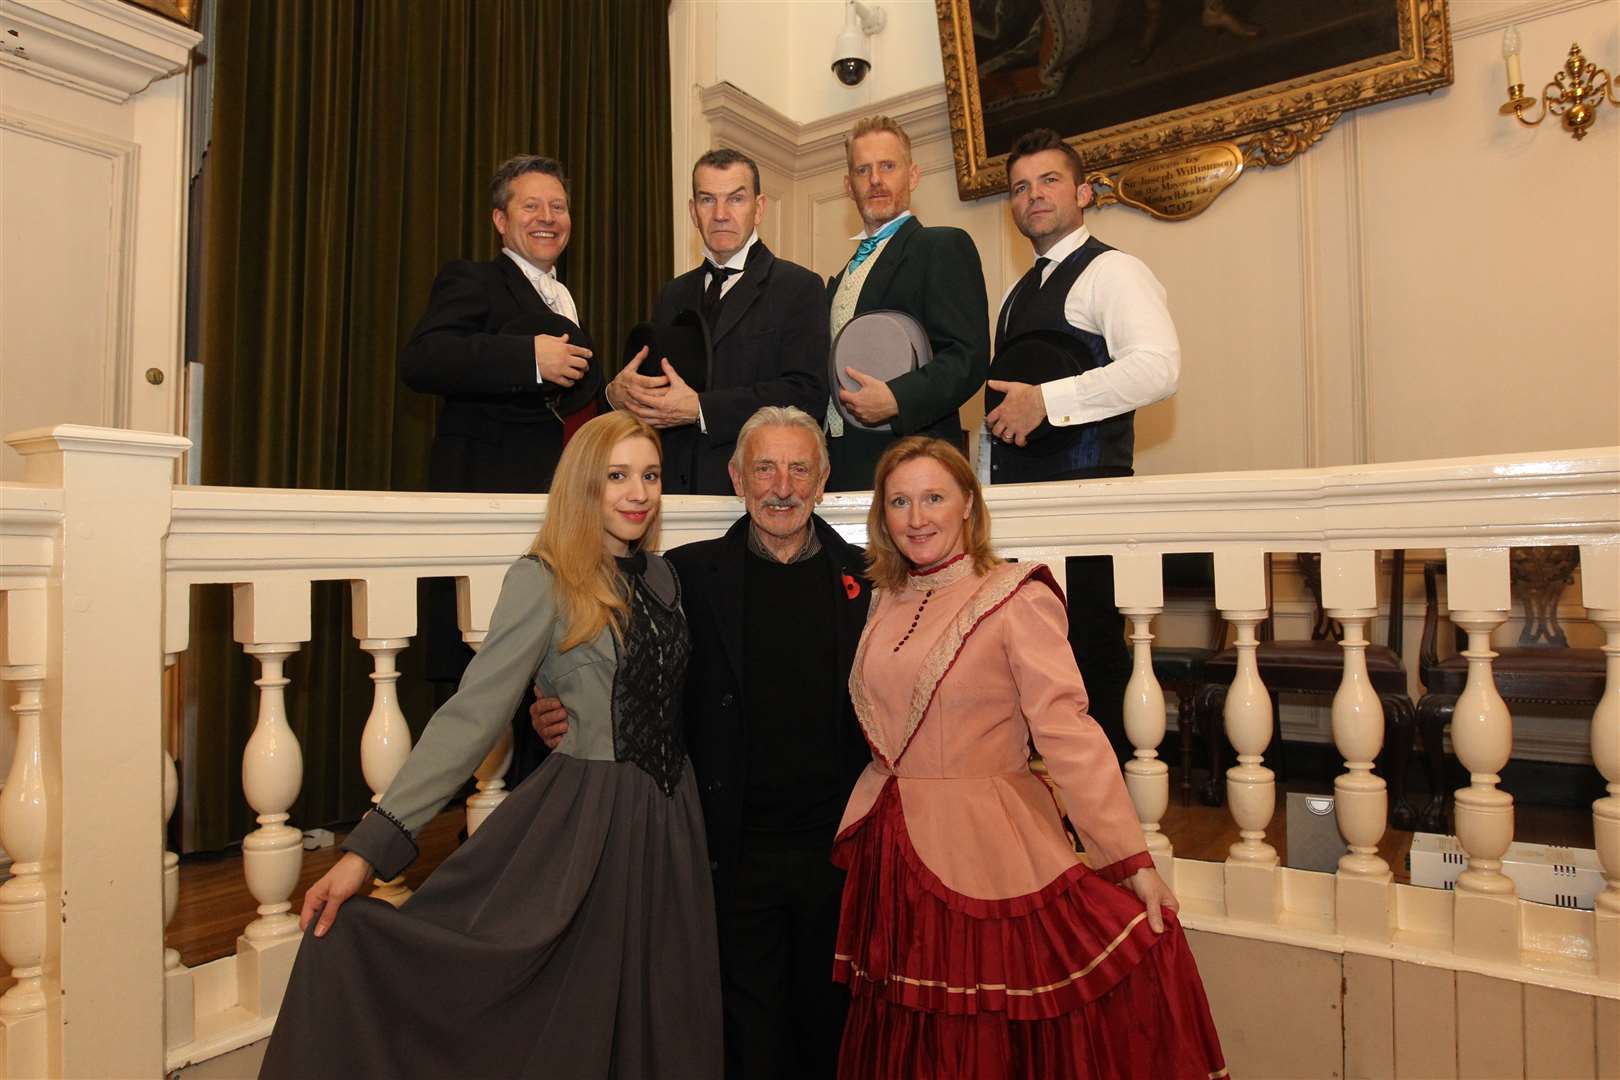 Eric Richard from the Bill with the cast of the Dickens production.